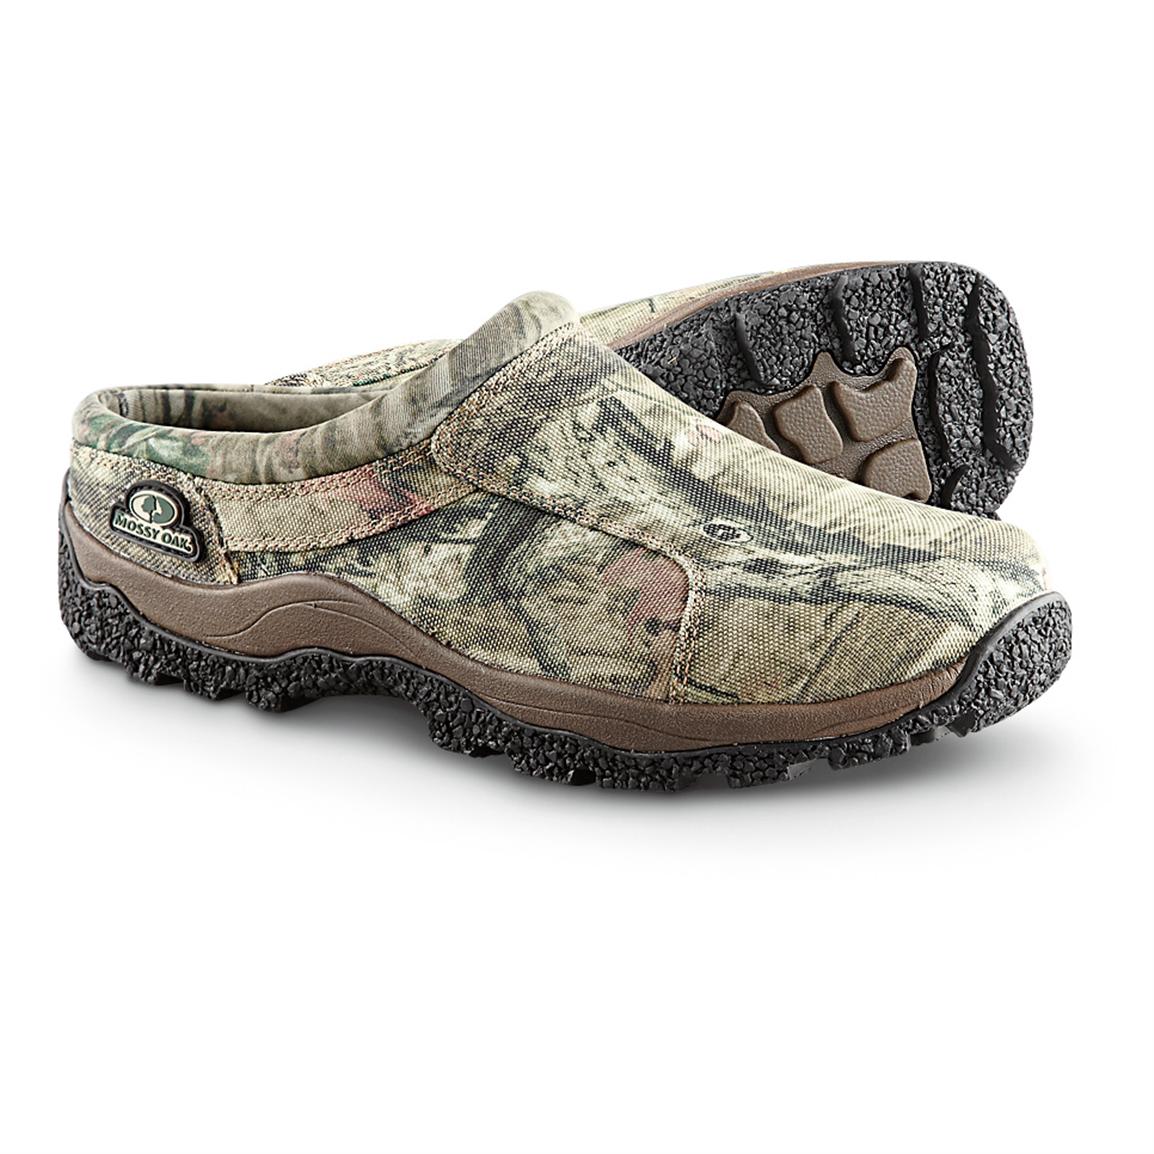 Men's Mossy Oak® Campfire Clogs - 234749, Casual Shoes at Sportsman's Guide